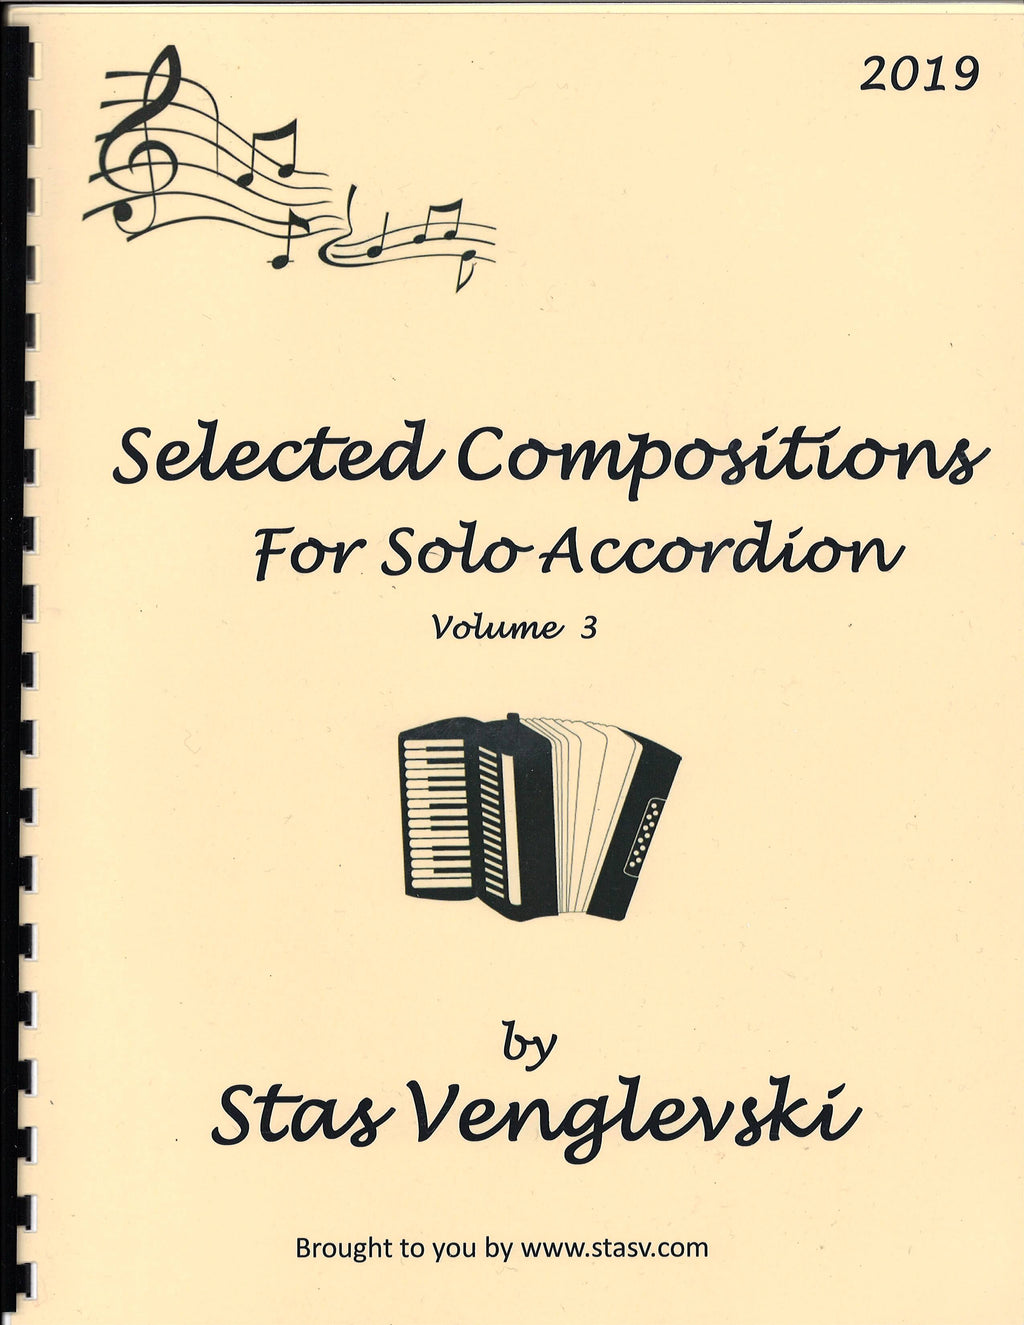 Selected Composition for Solo Accordion Volume 3